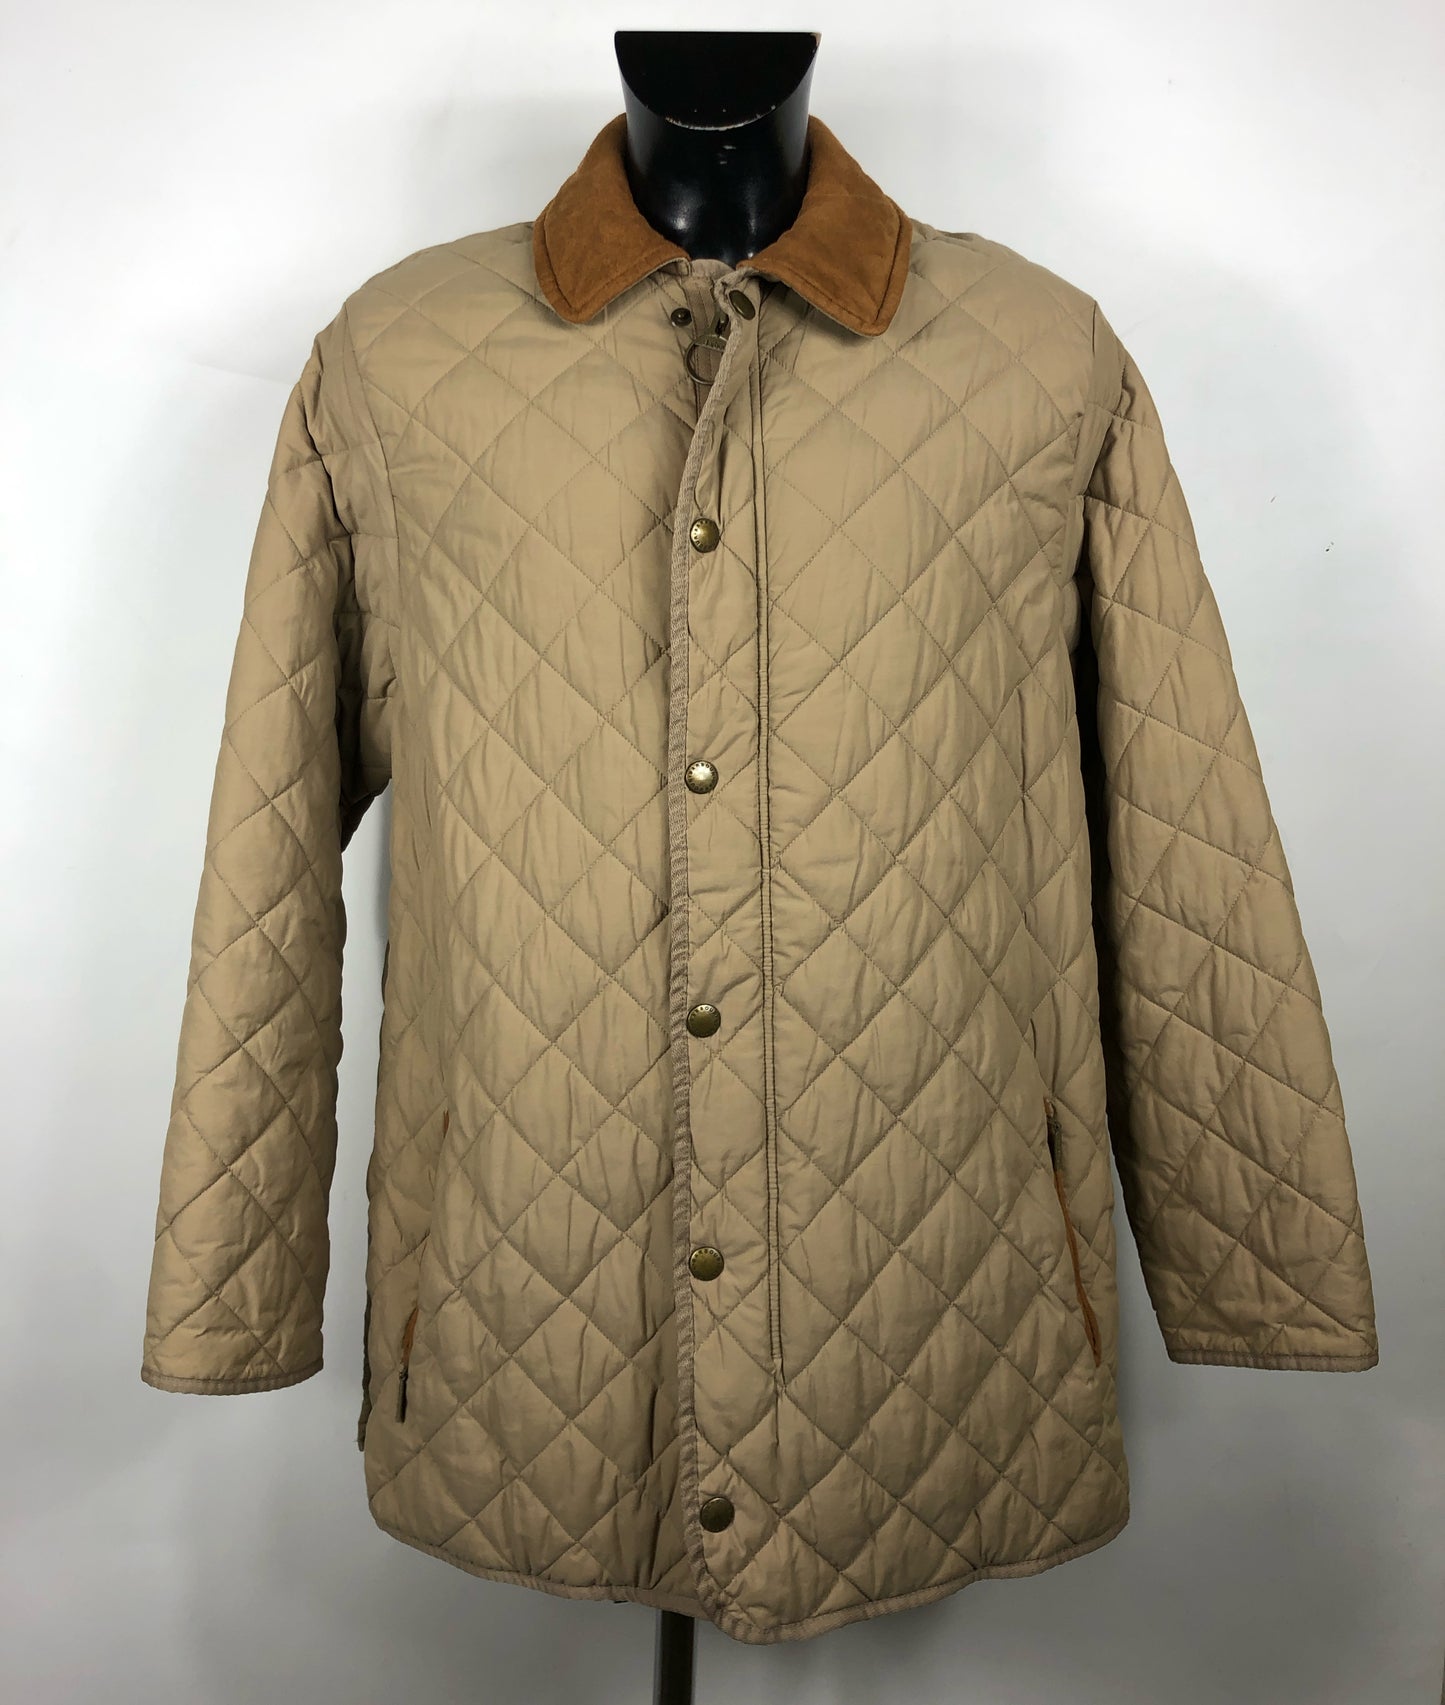 Giacca a vento Barbour Beige XL - Man Quilted beige wind jacket Size XLarge